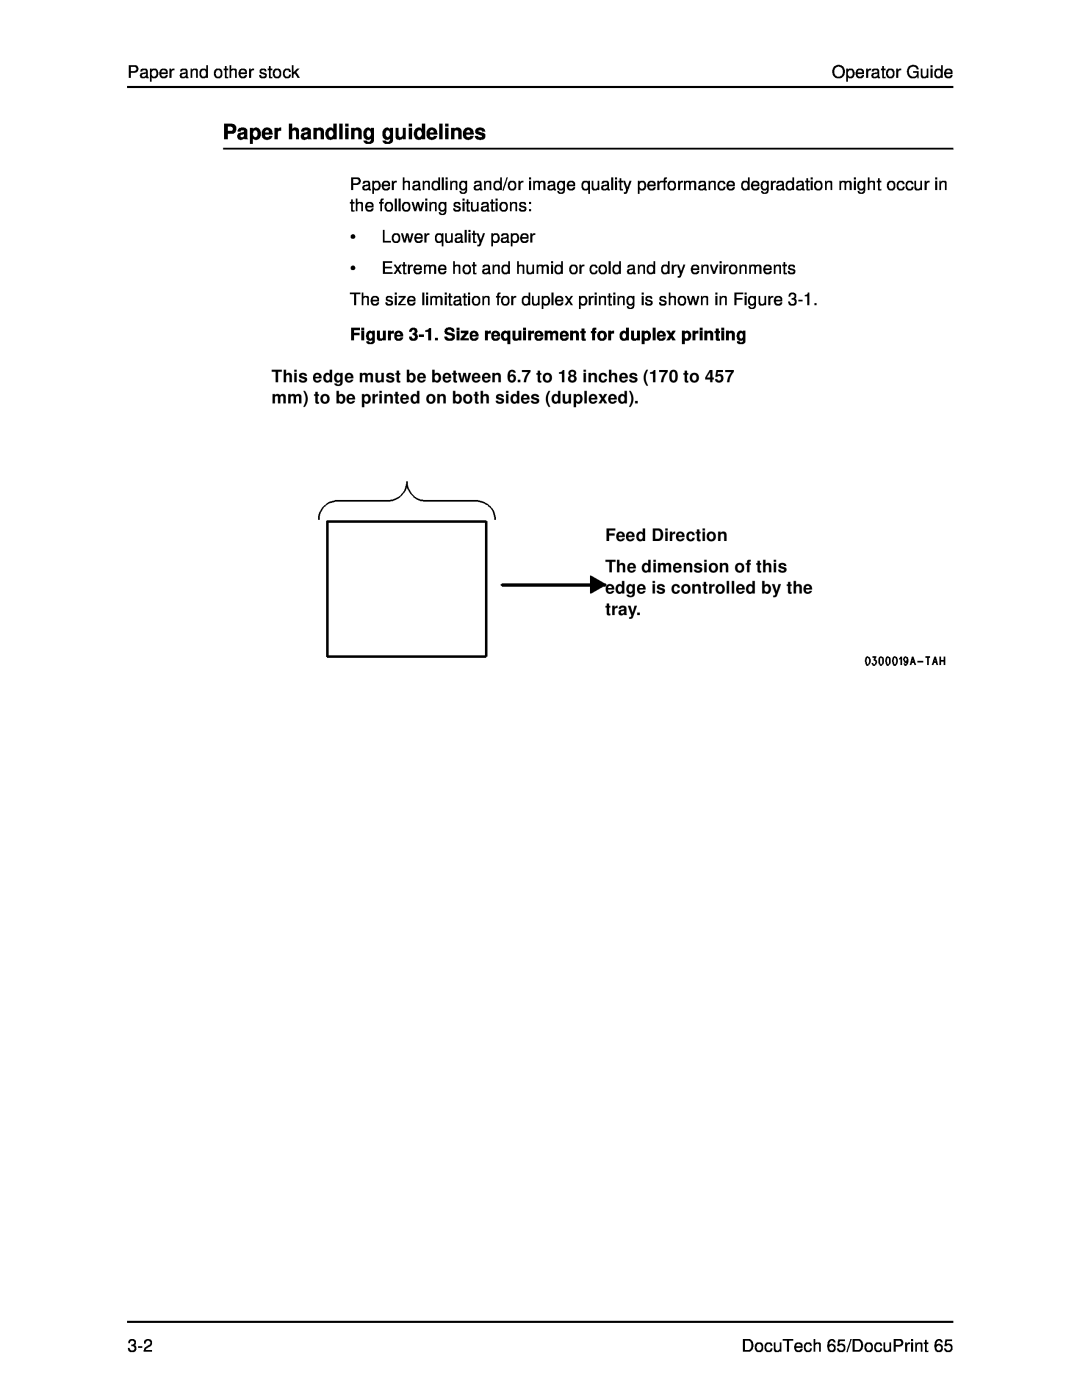 Xerox DOCUTECH 65 manual Paper handling guidelines, 1. Size requirement for duplex printing 